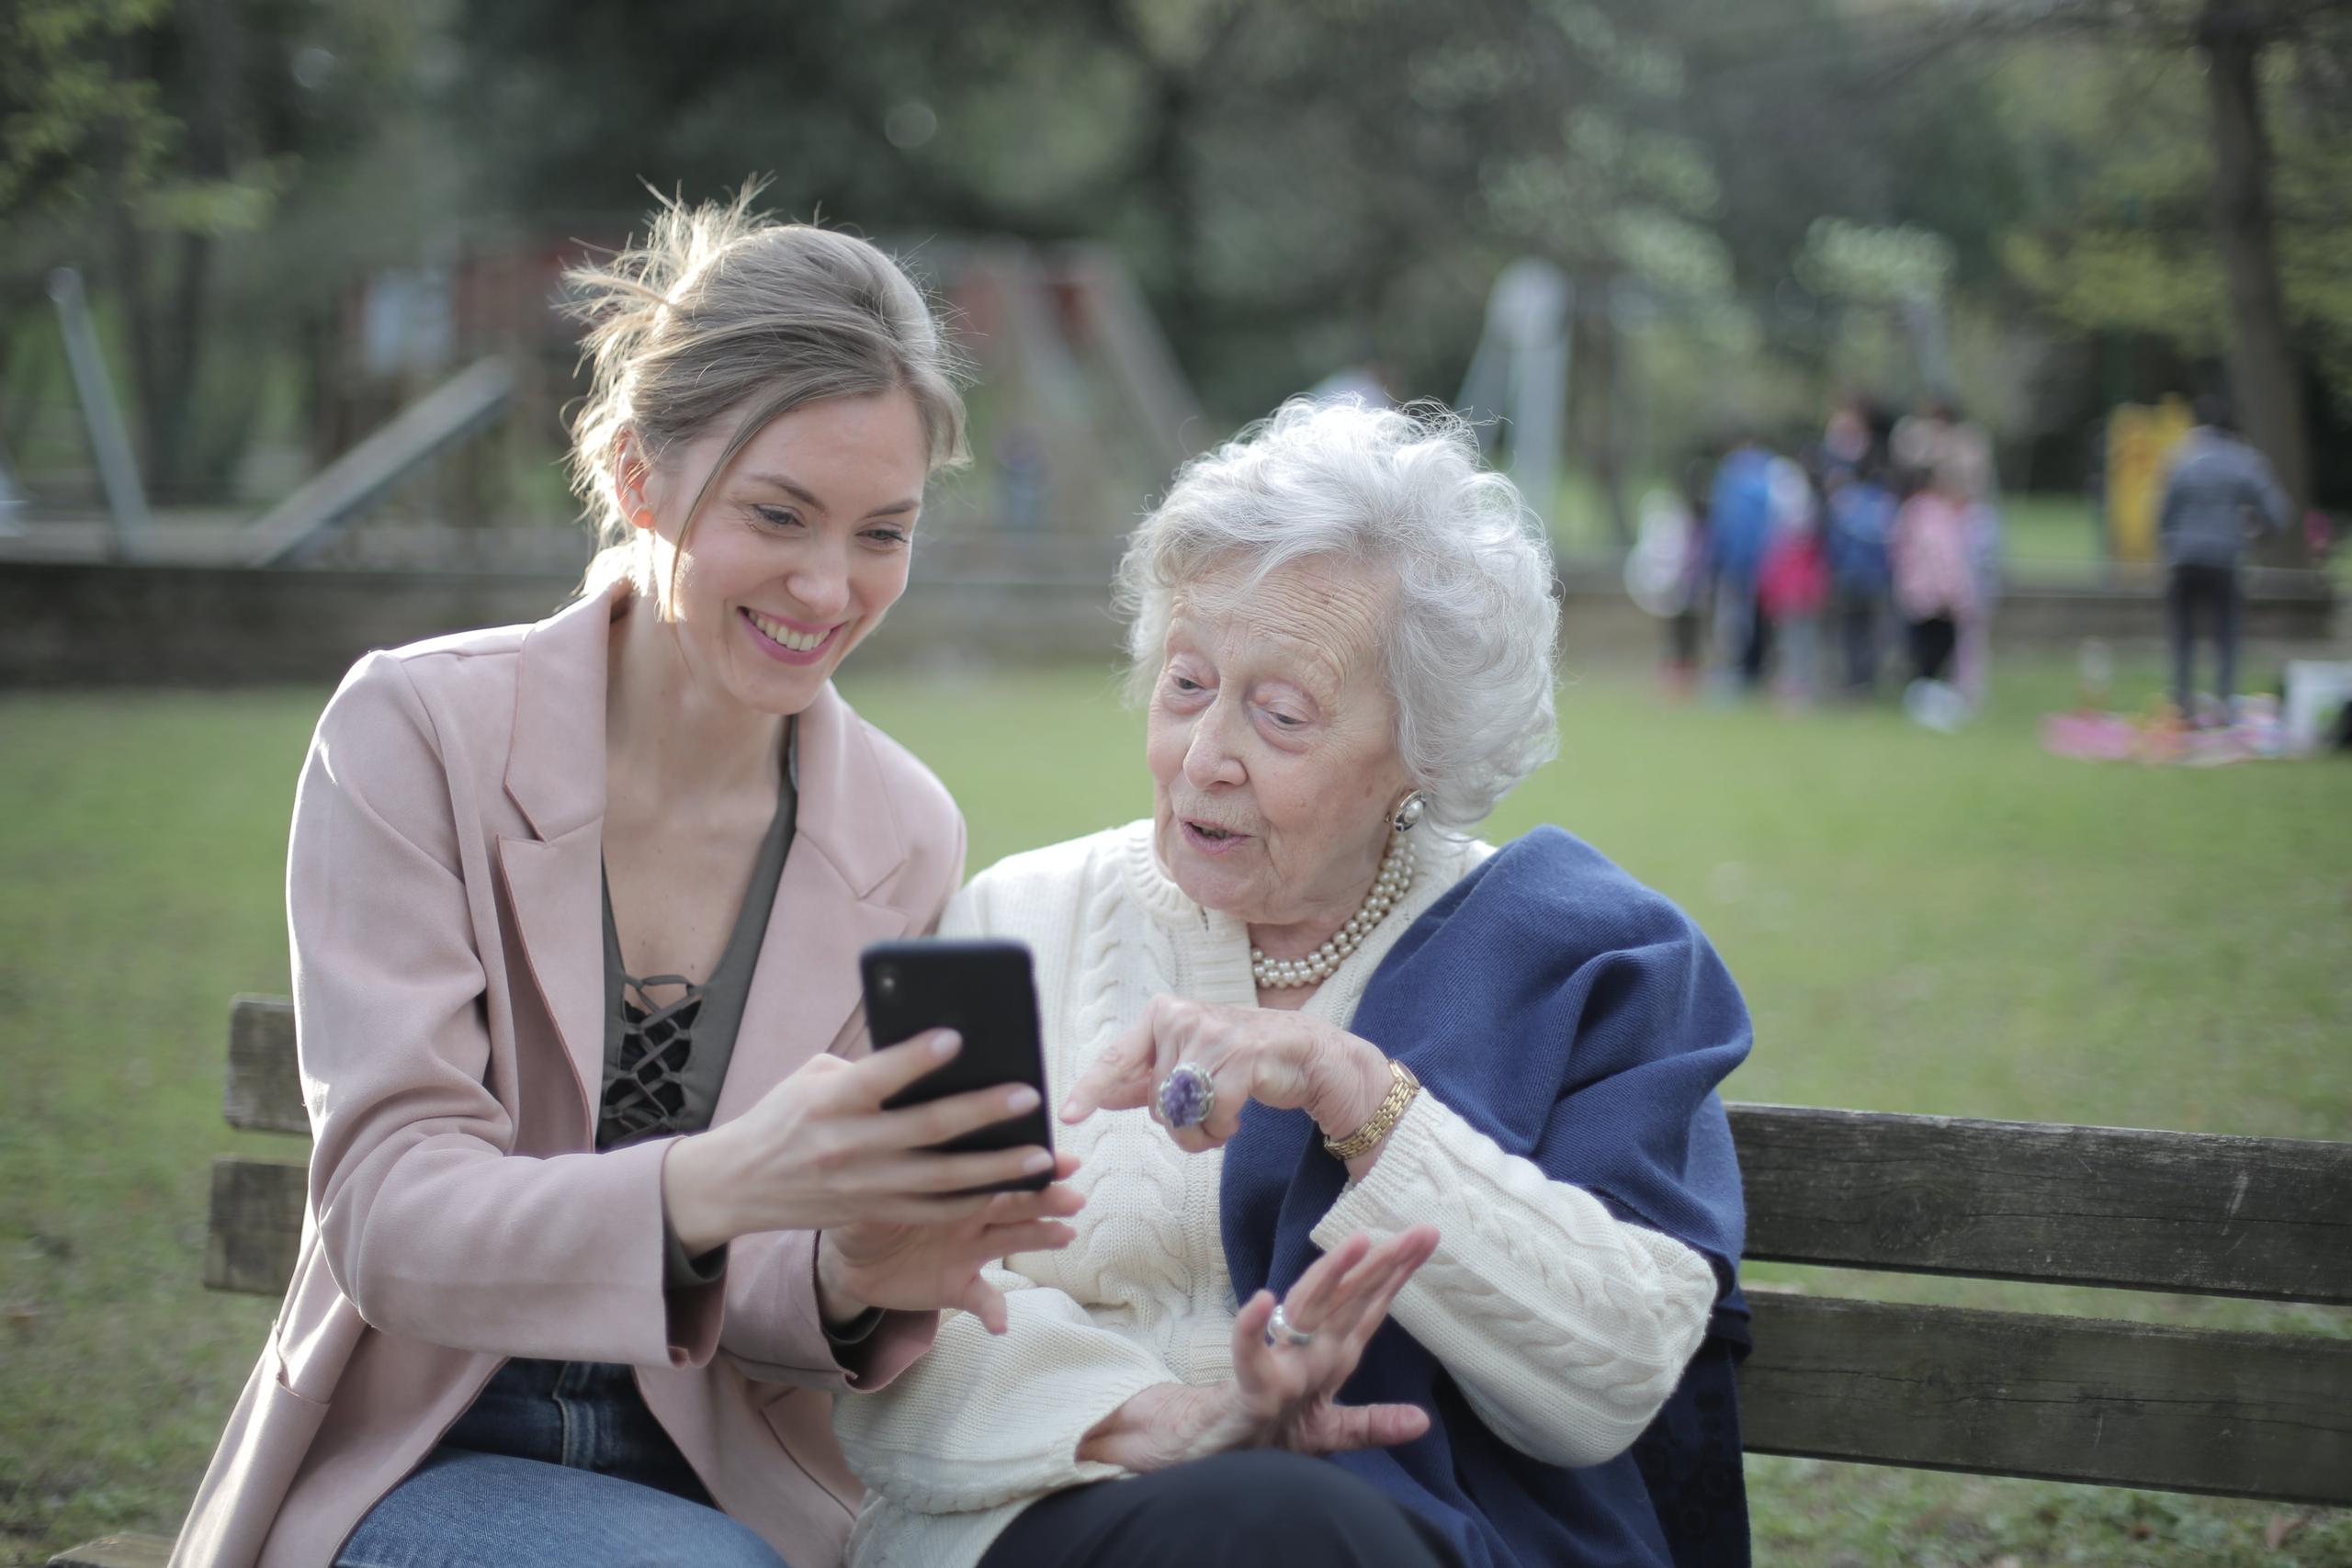 Could the government be surveilling your granny?